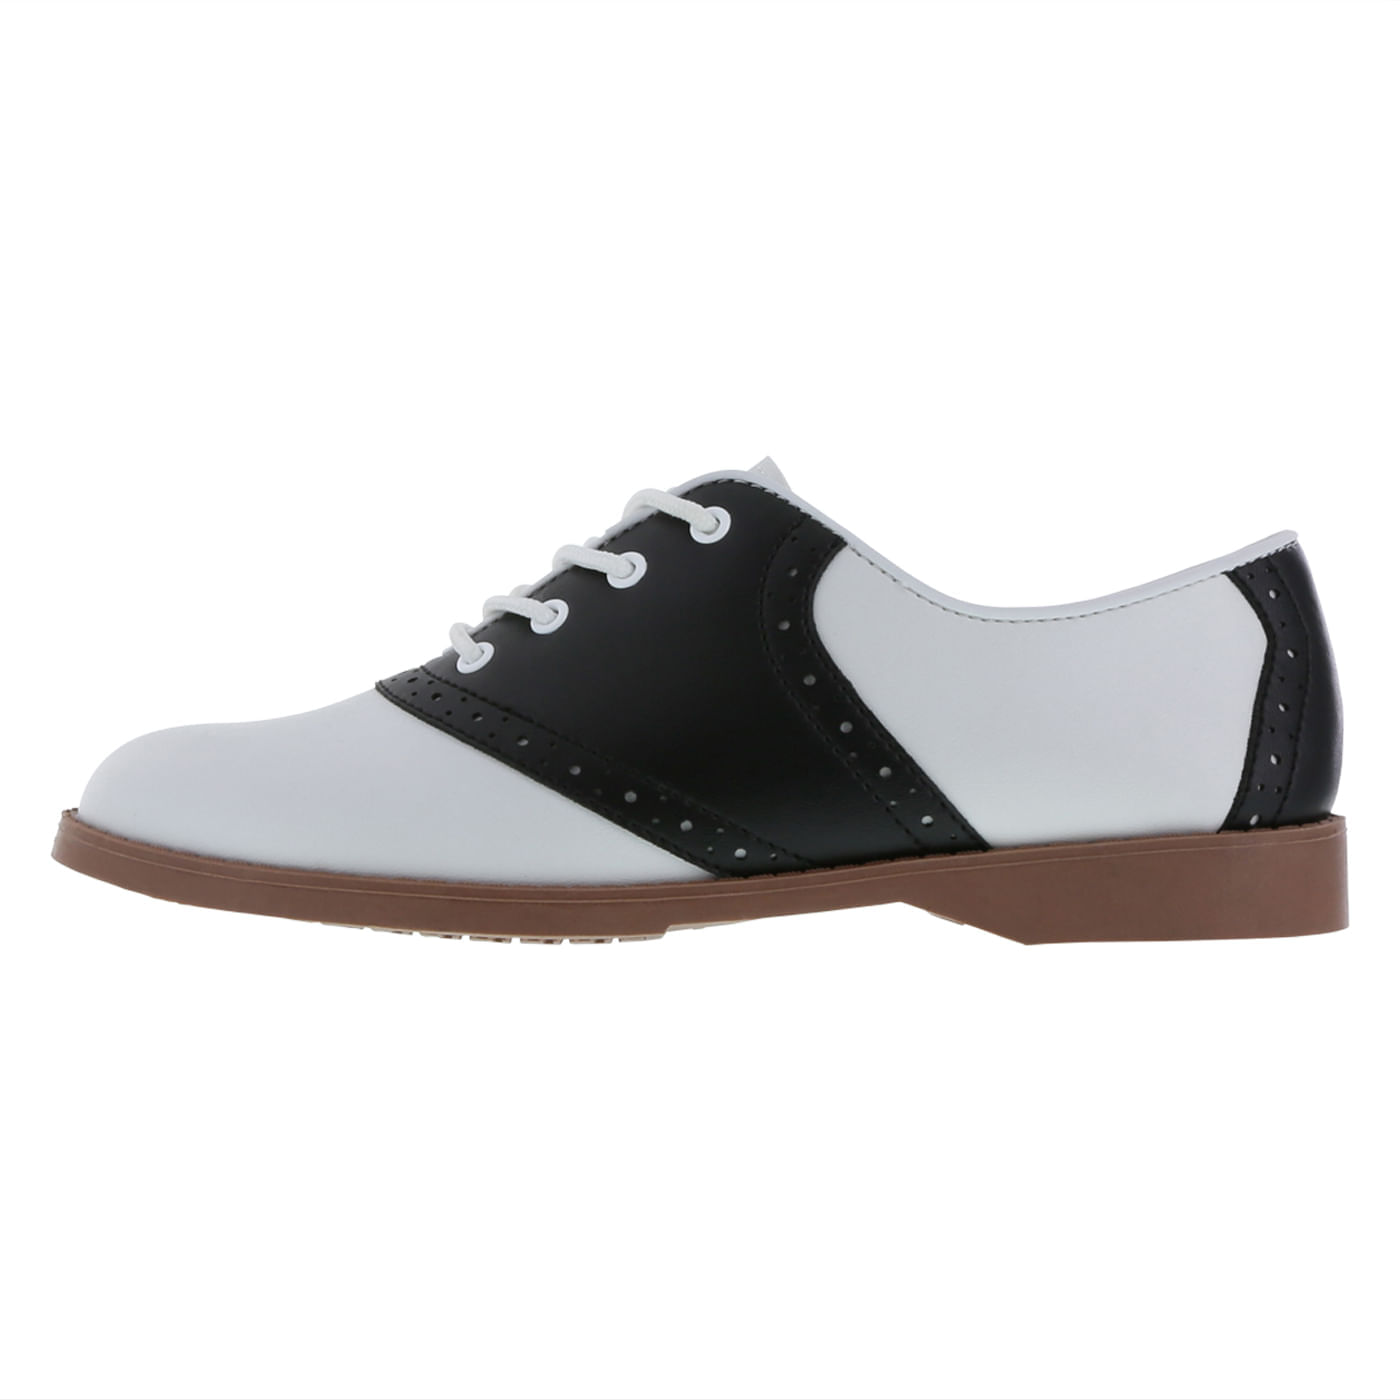 payless saddle shoes